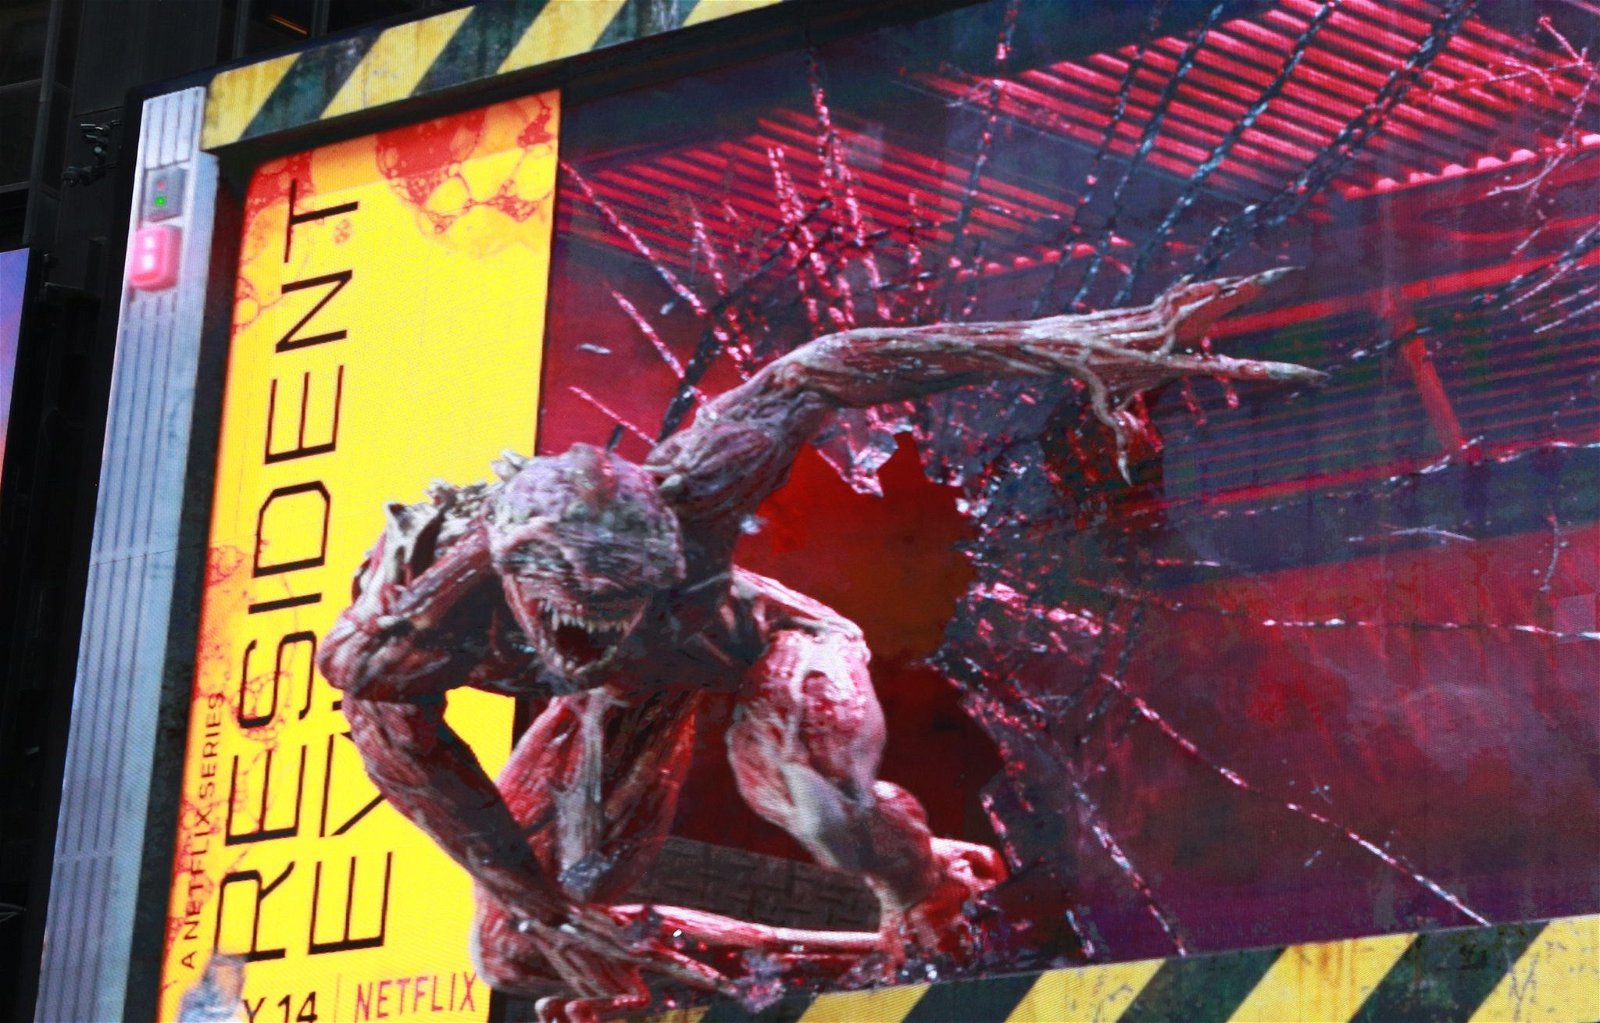 As ‘Resident Evil’ Roars on Release Day Netflix Celebrates the INFECTED With an Awesome Live Billboard